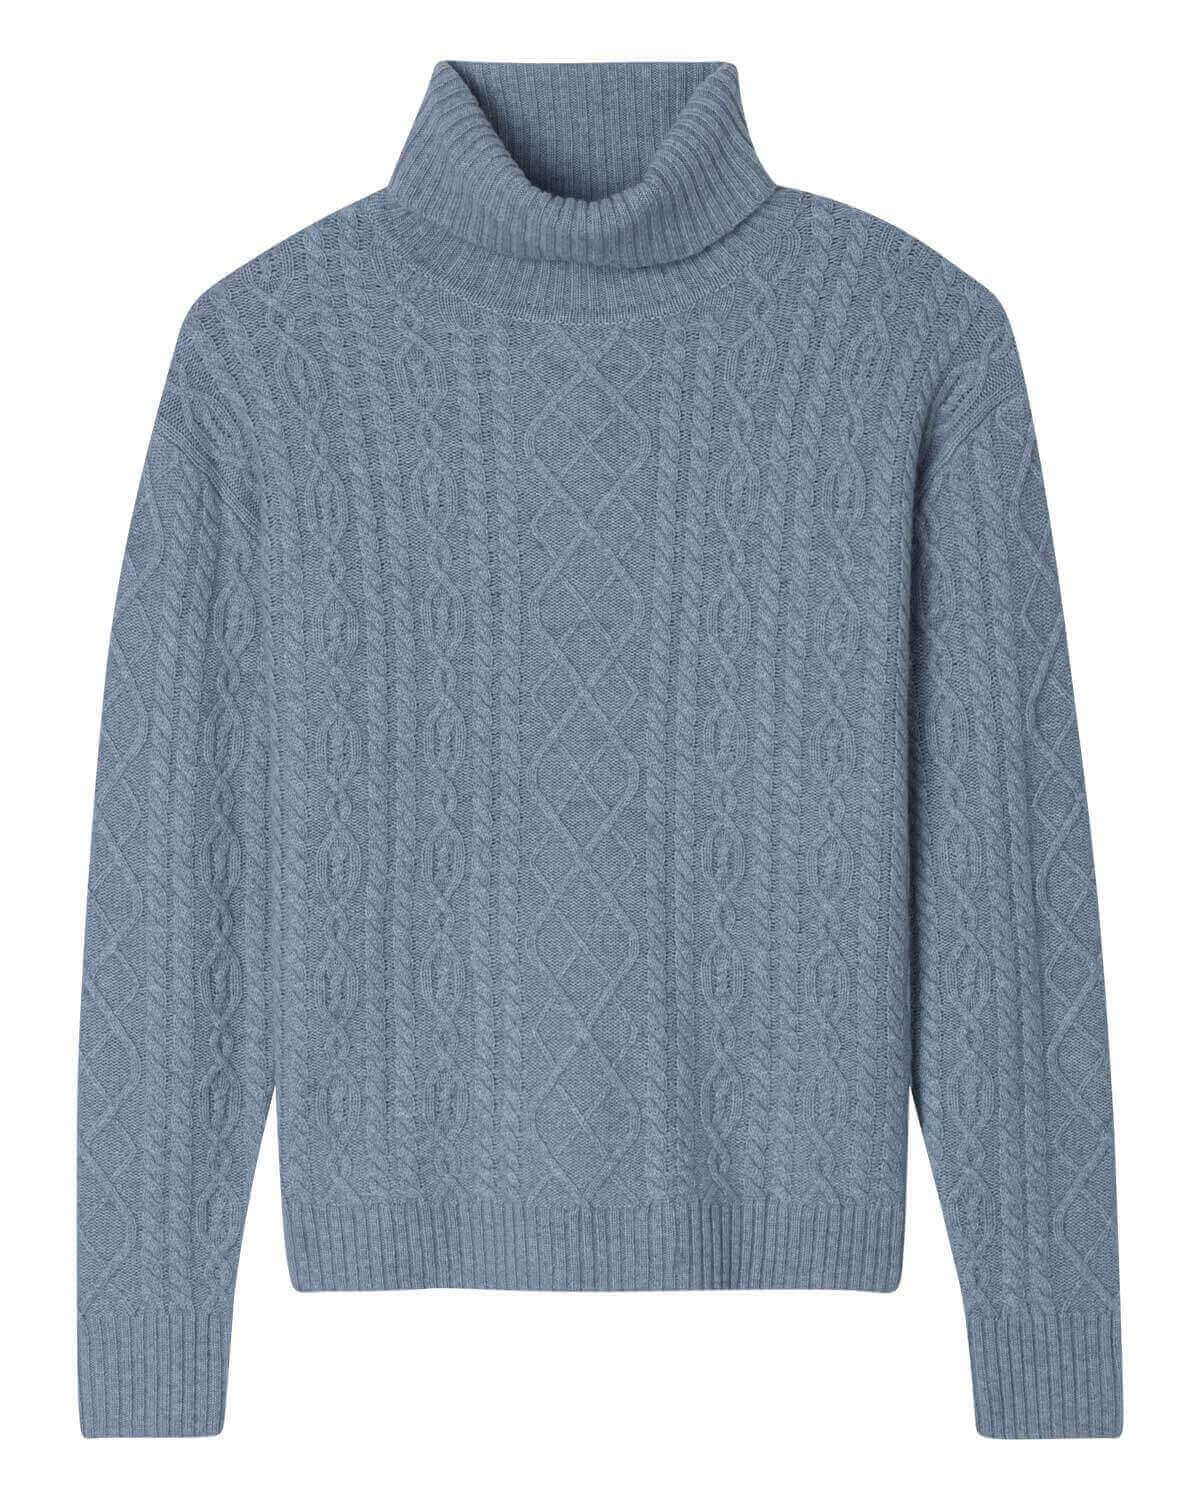 Cashmere Mixed Cable Turtleneck